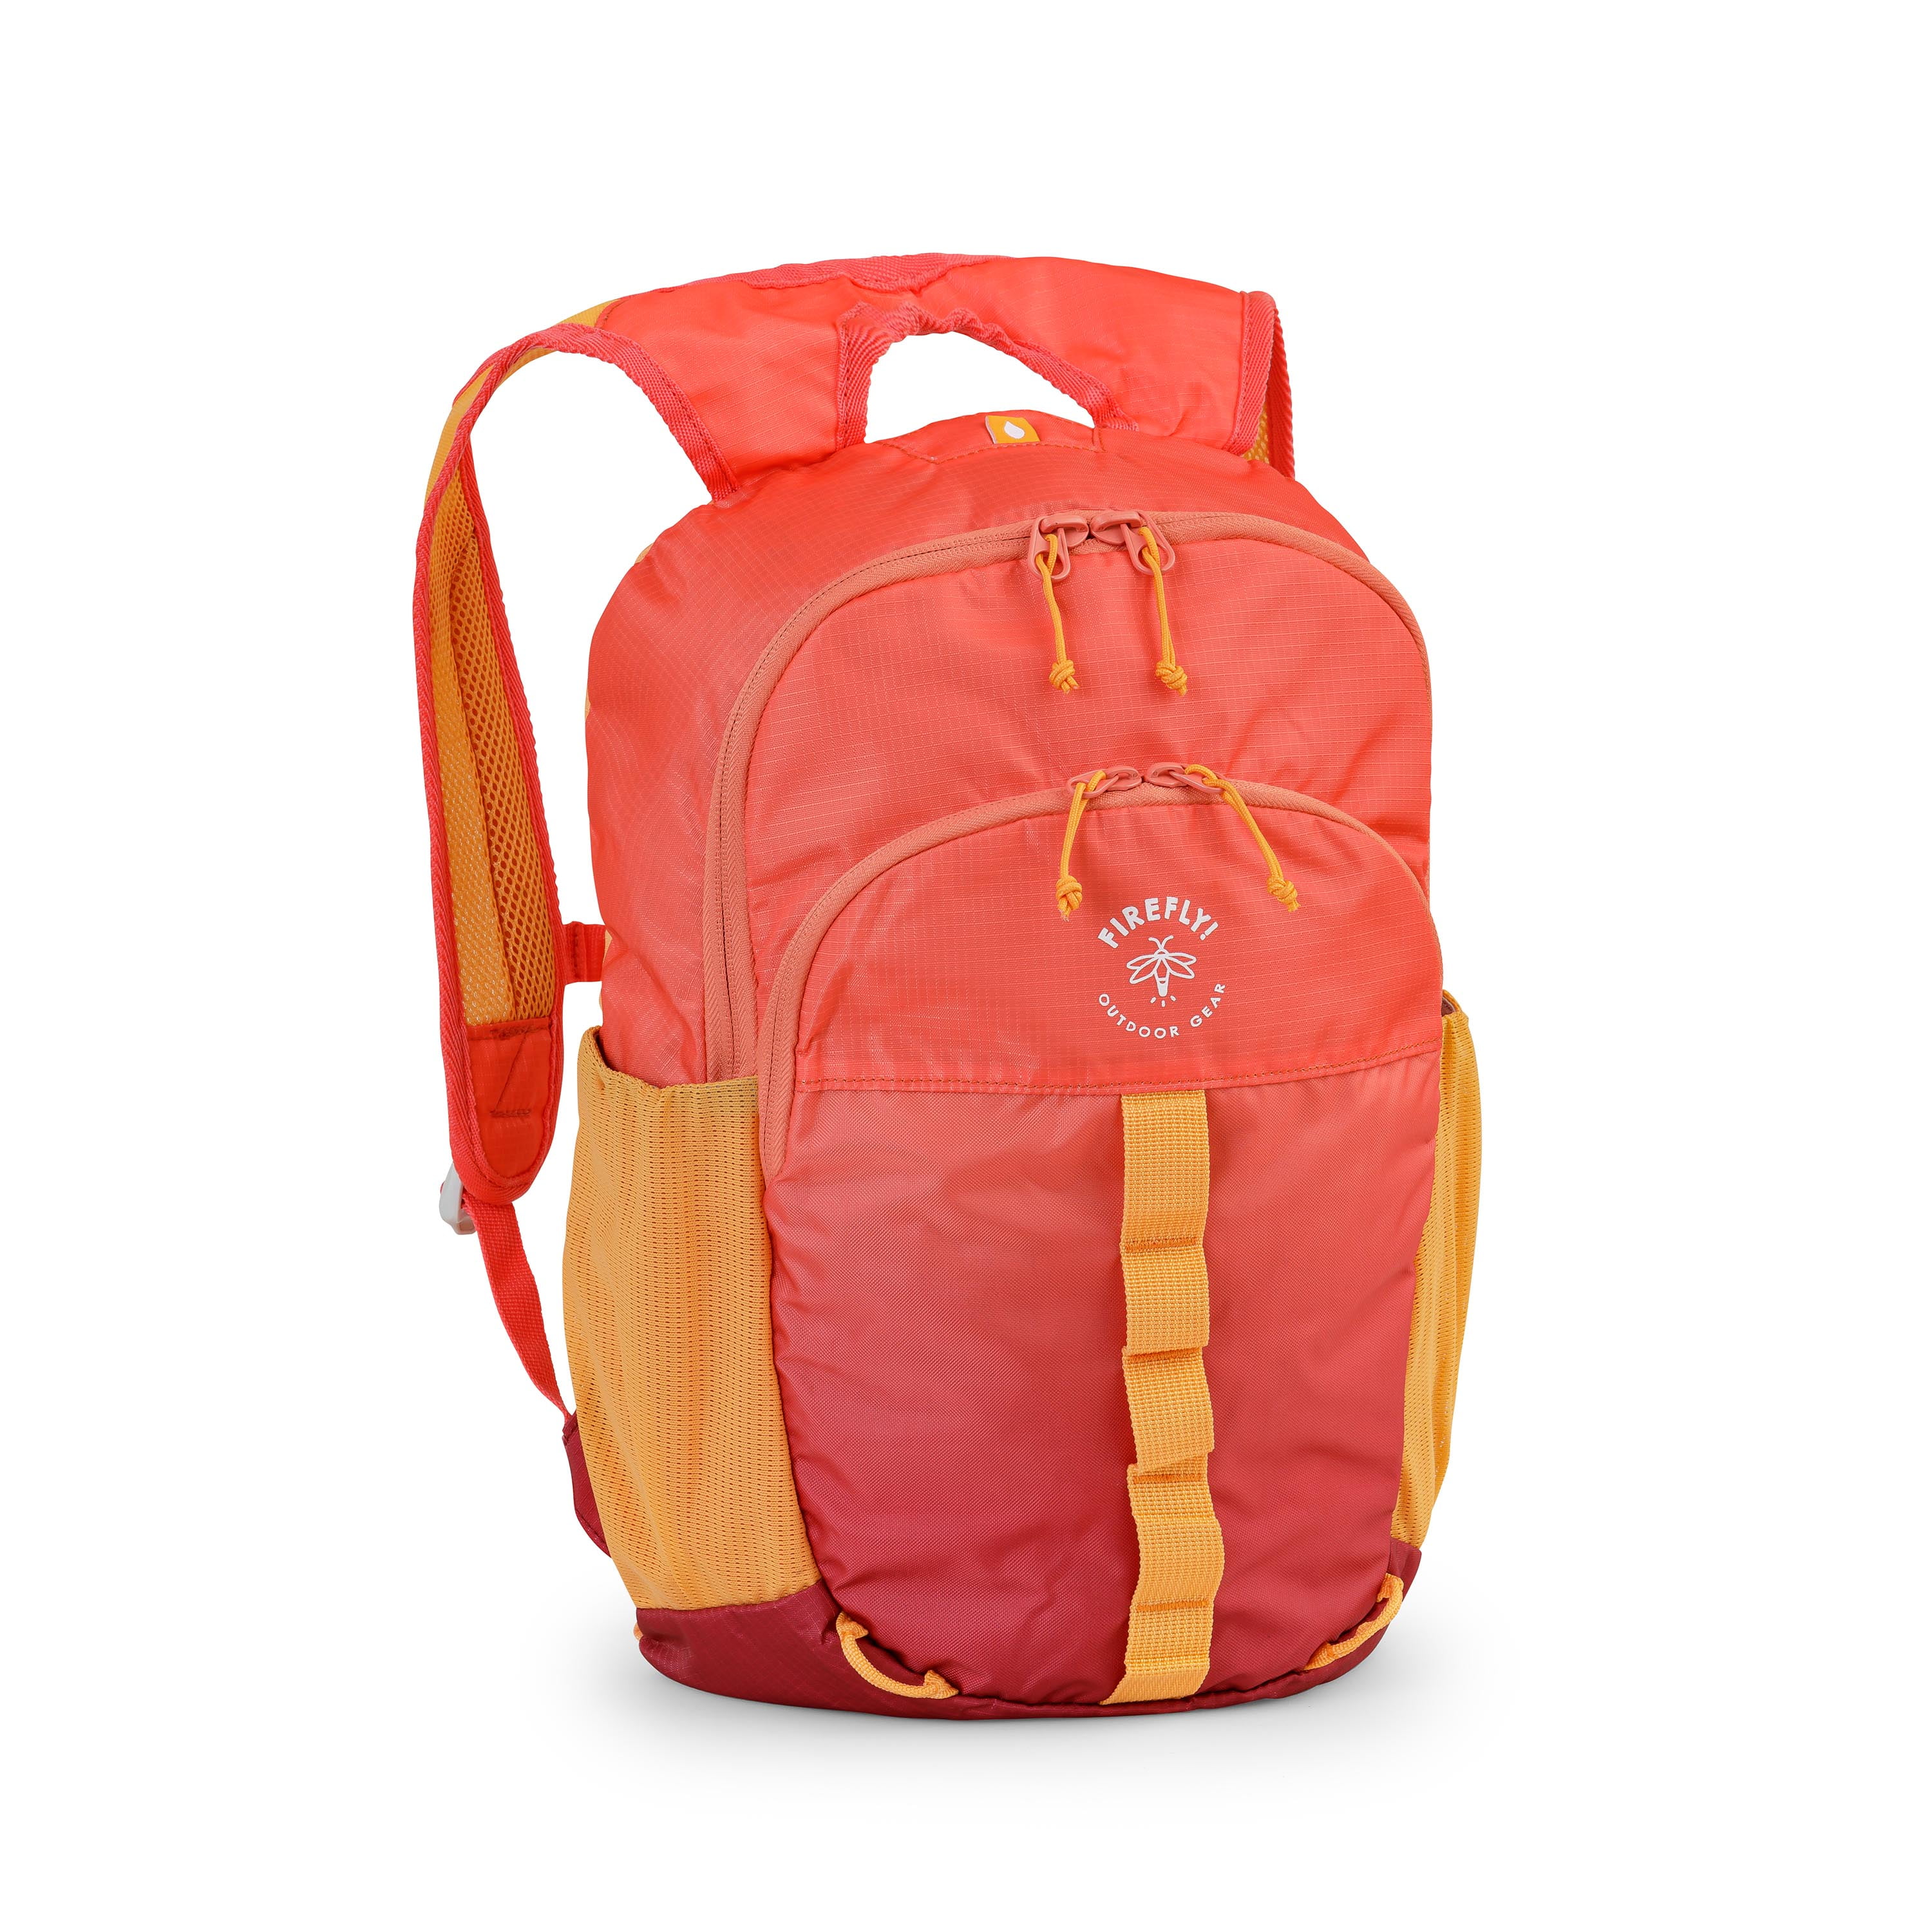 Firefly! Outdoor Gear Youth Outdoor Camping Backpack - Red/Orange, Unisex, Ages 9-12 (13 Liter), POLYESTER, Size: 13 Large